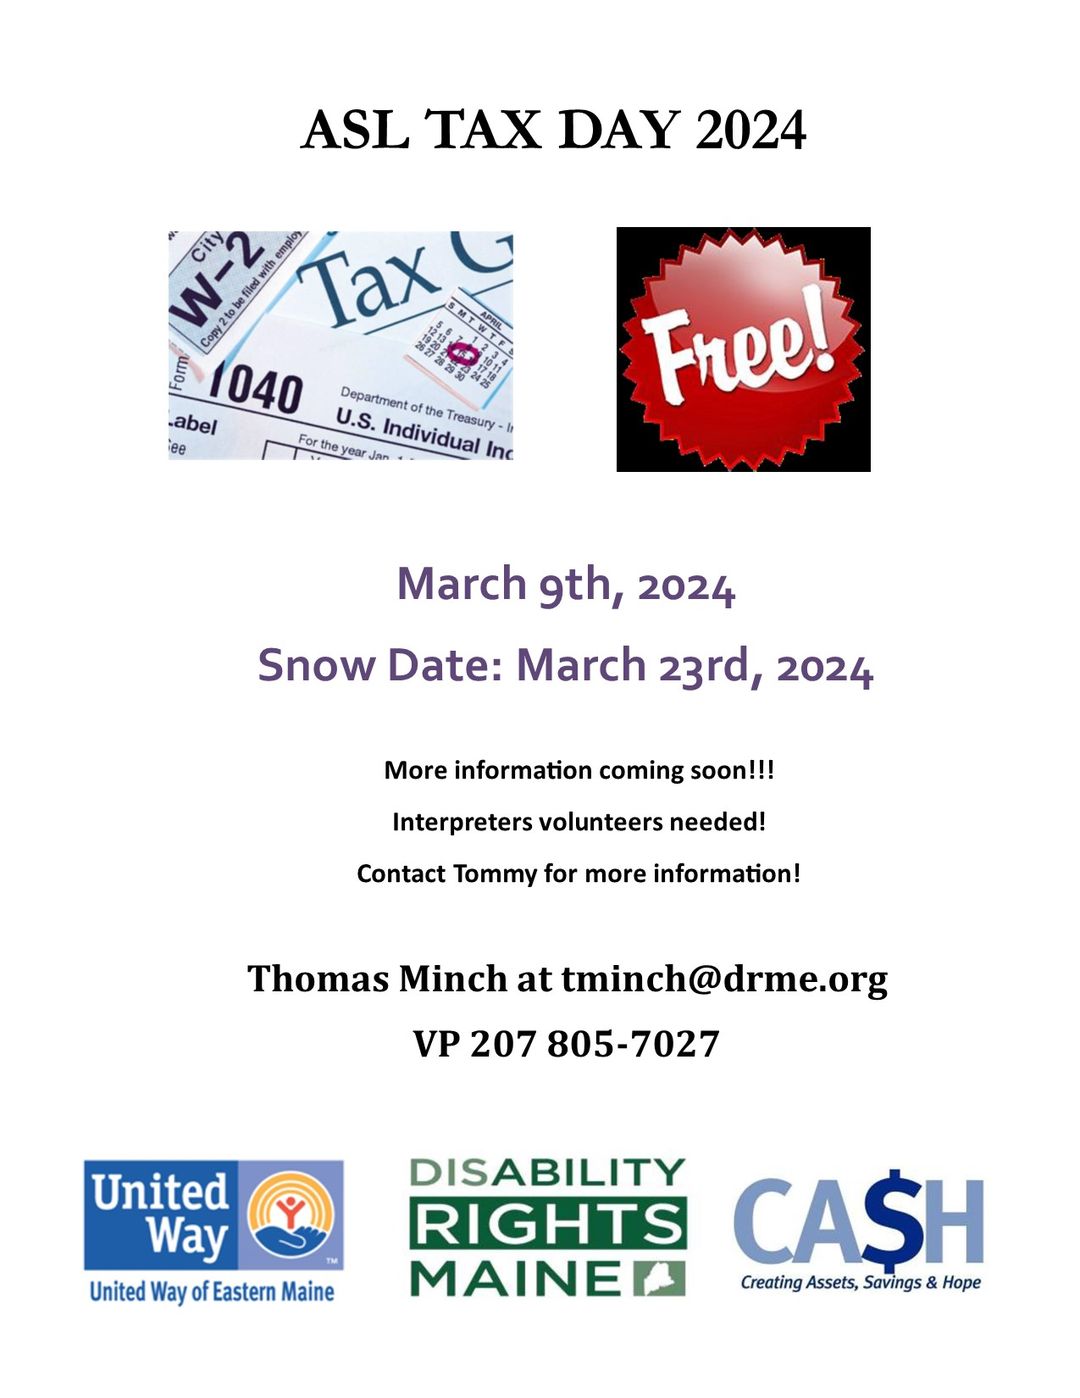 ASL Tax Day hosted by DRM flyer. 